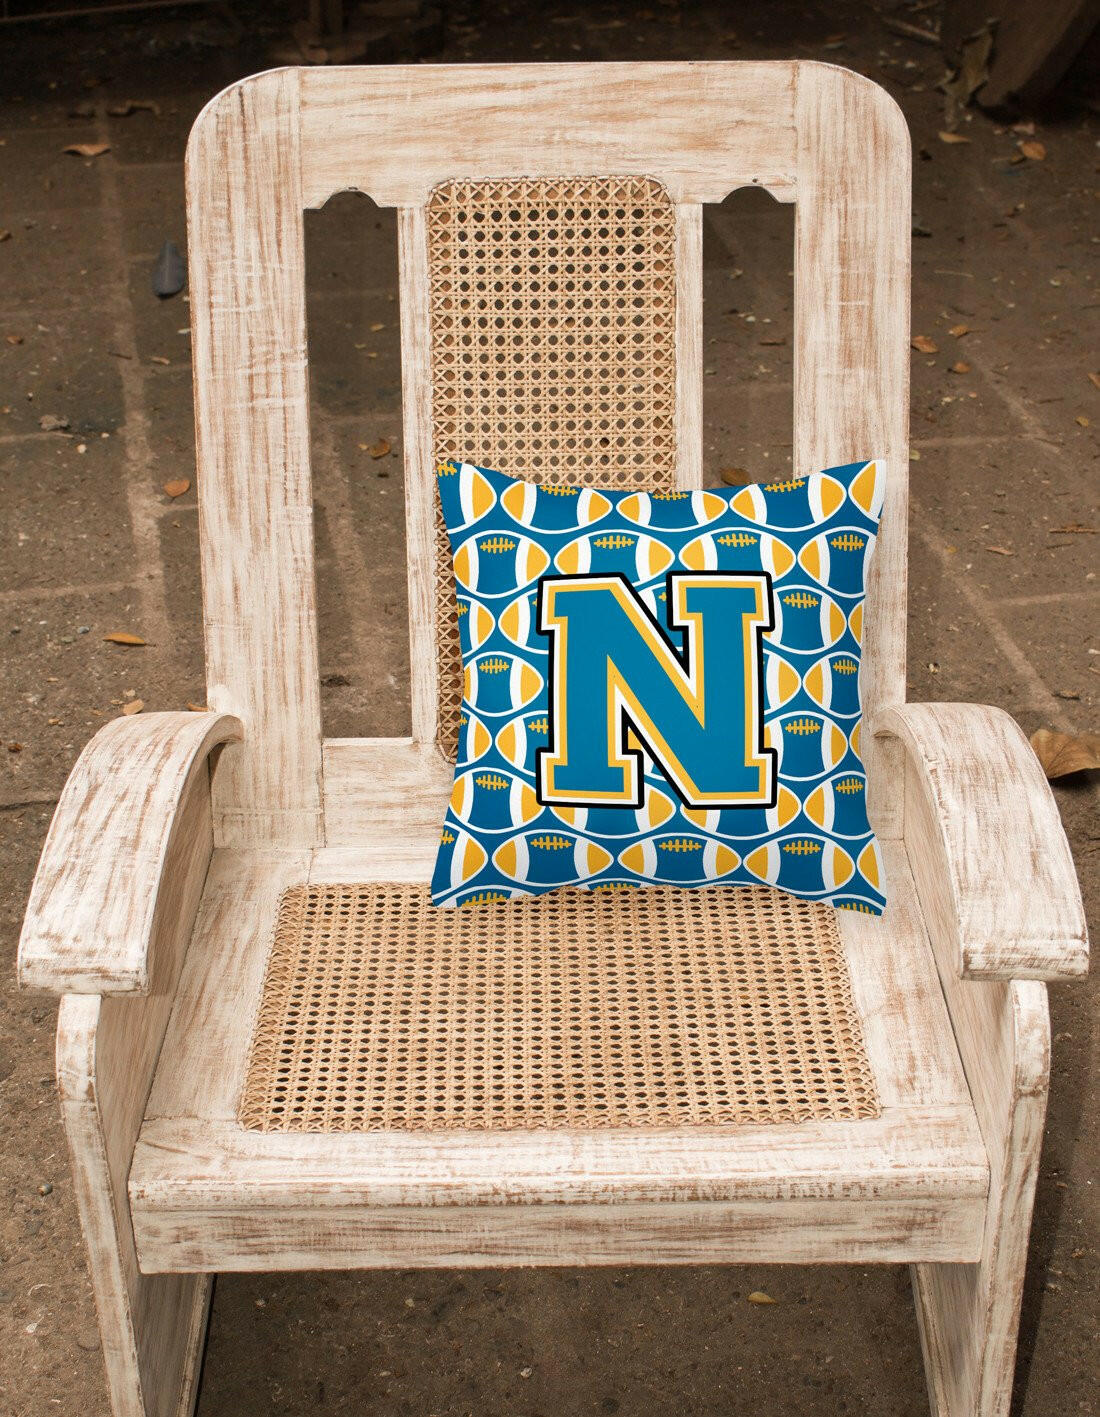 Letter N Football Blue and Gold Fabric Decorative Pillow CJ1077-NPW1414 by Caroline's Treasures